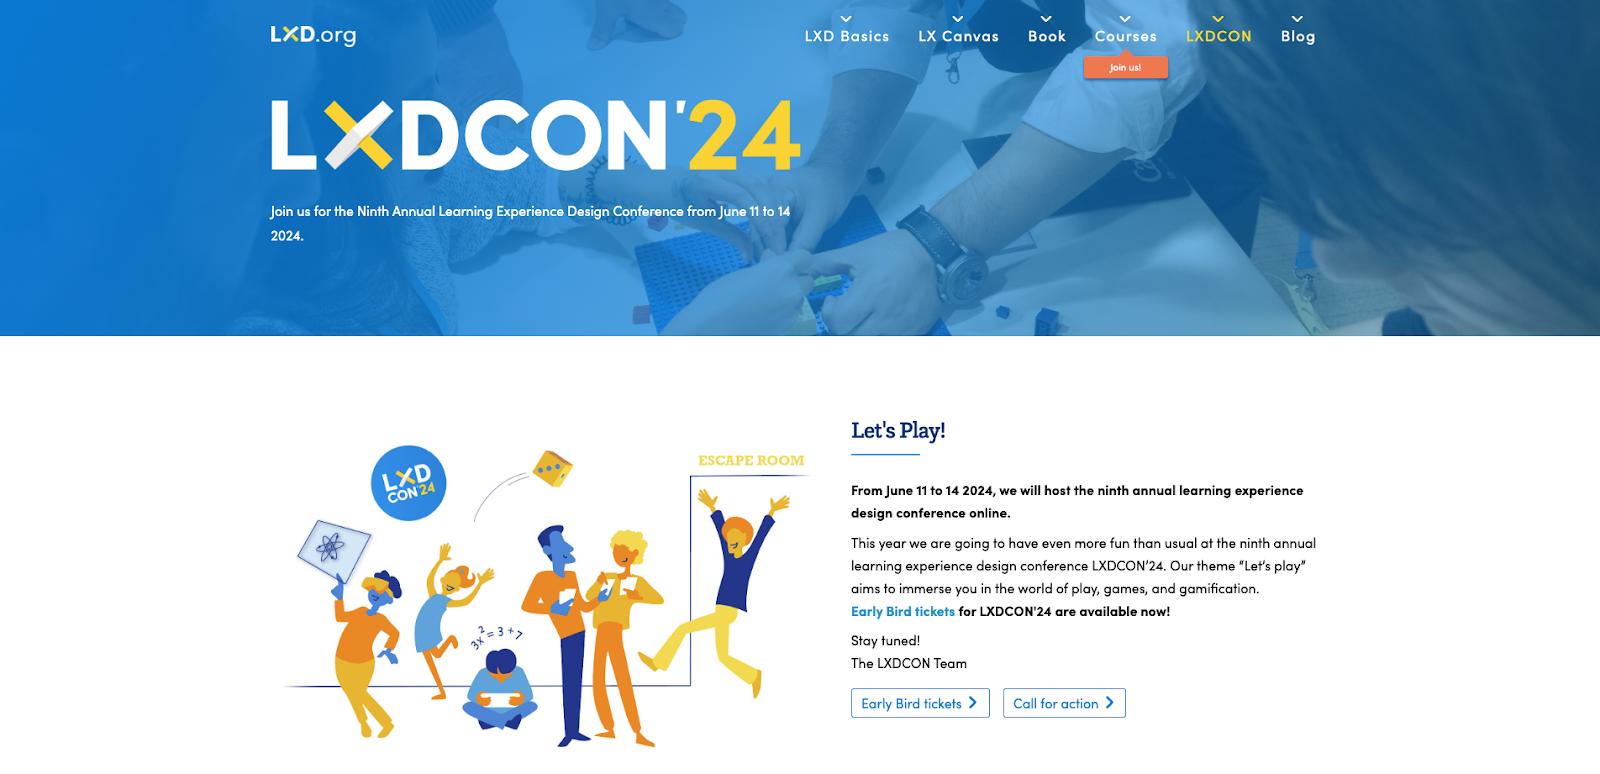 LXDCON'24 is a fun instructional design conference aimed at professionals interested in incorporating games into learning design. 